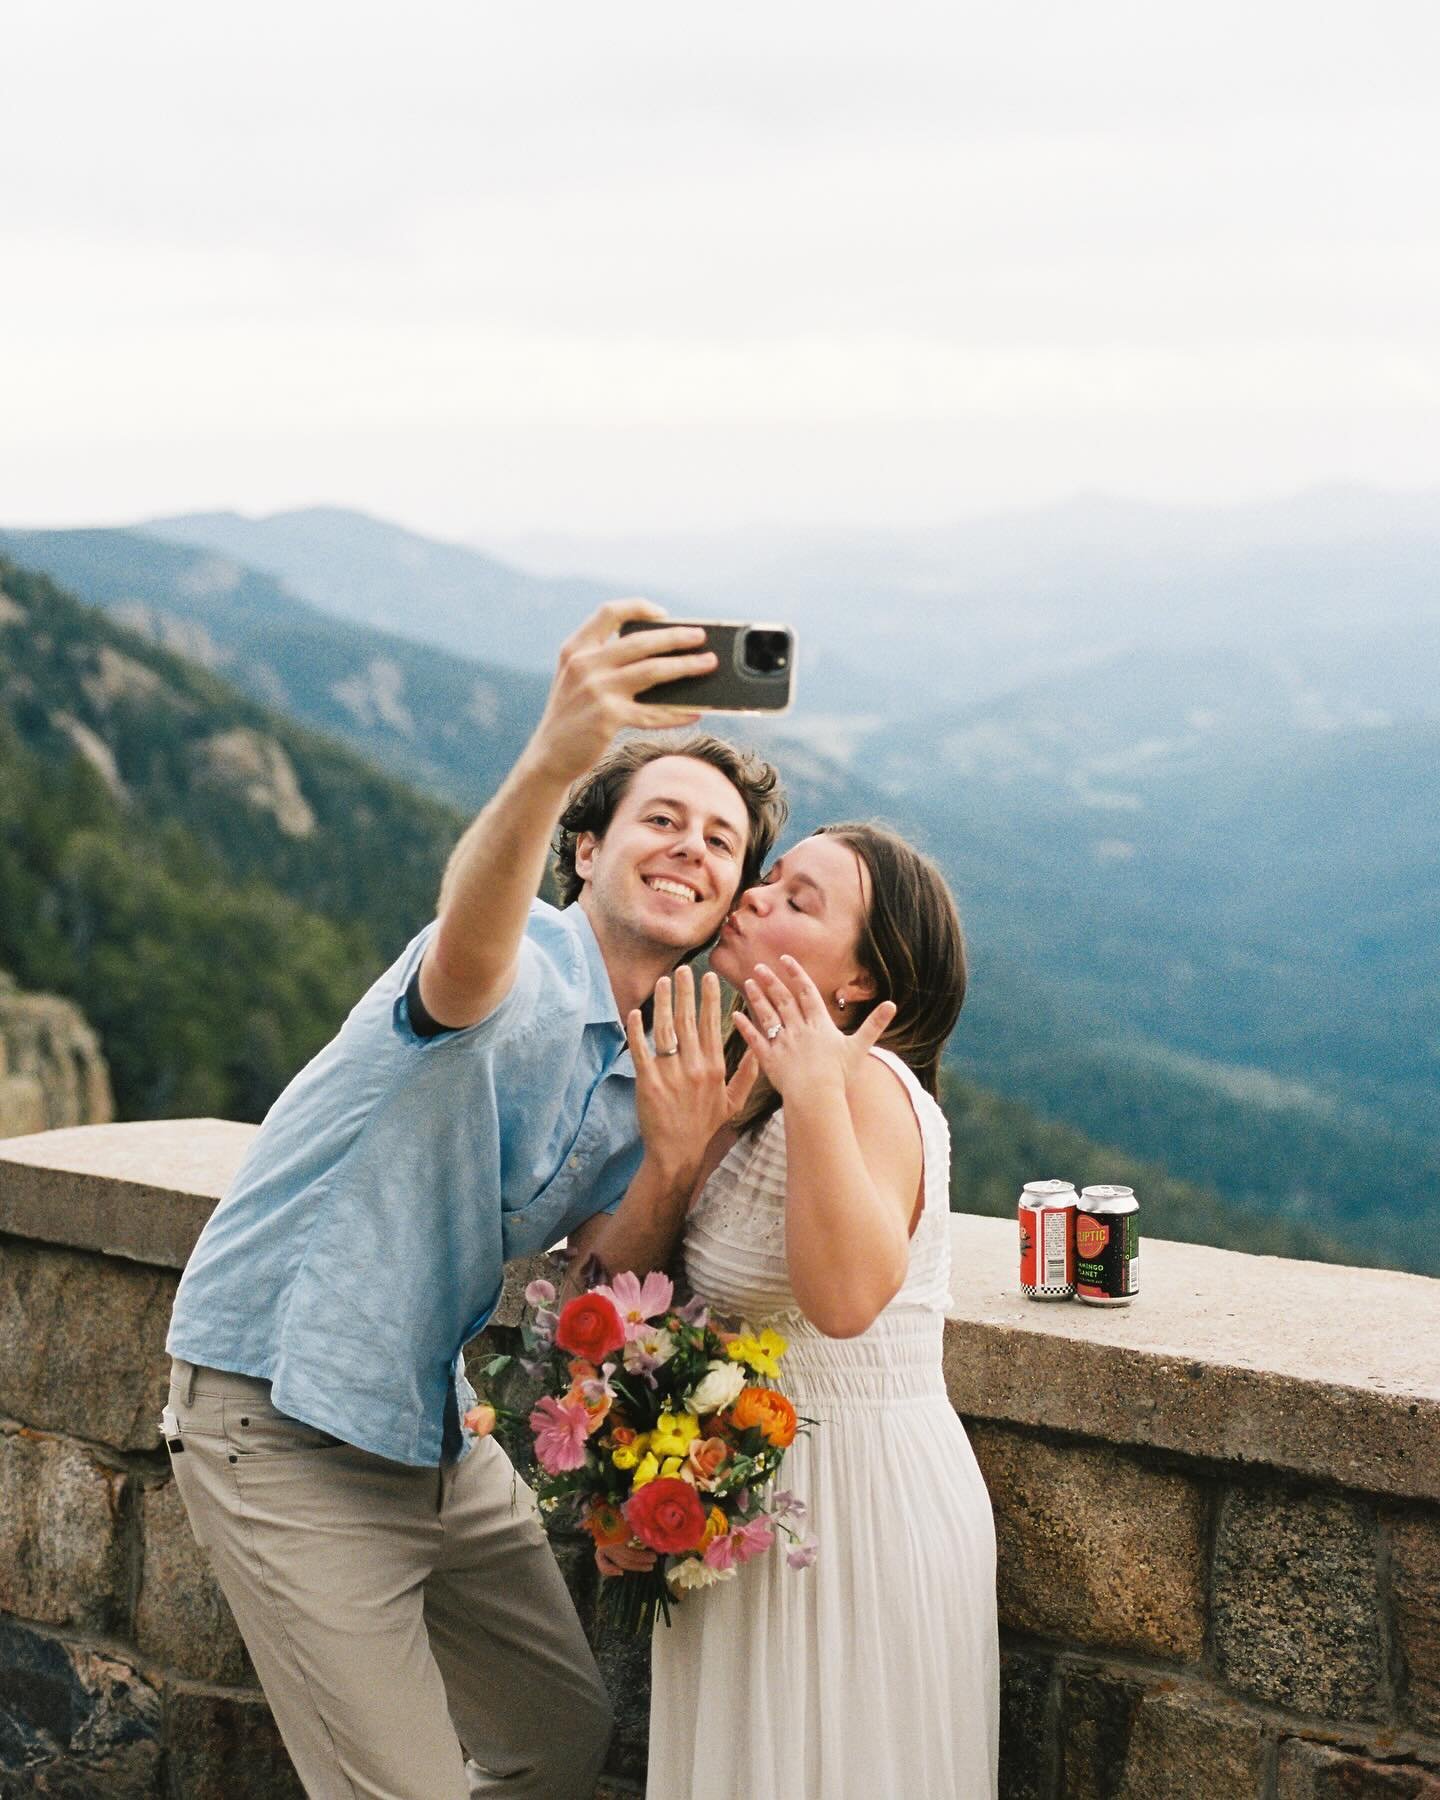 Time to BeReal. Elopement style. 

🏷️
#Coloradoelopementphotographer #coloradoelopement #elopementphotographer #microweddingphotographer #pnwelopement #pnwelopementphotographer #utahelopement #utahelopementphotographer Summer mountain elopement on f